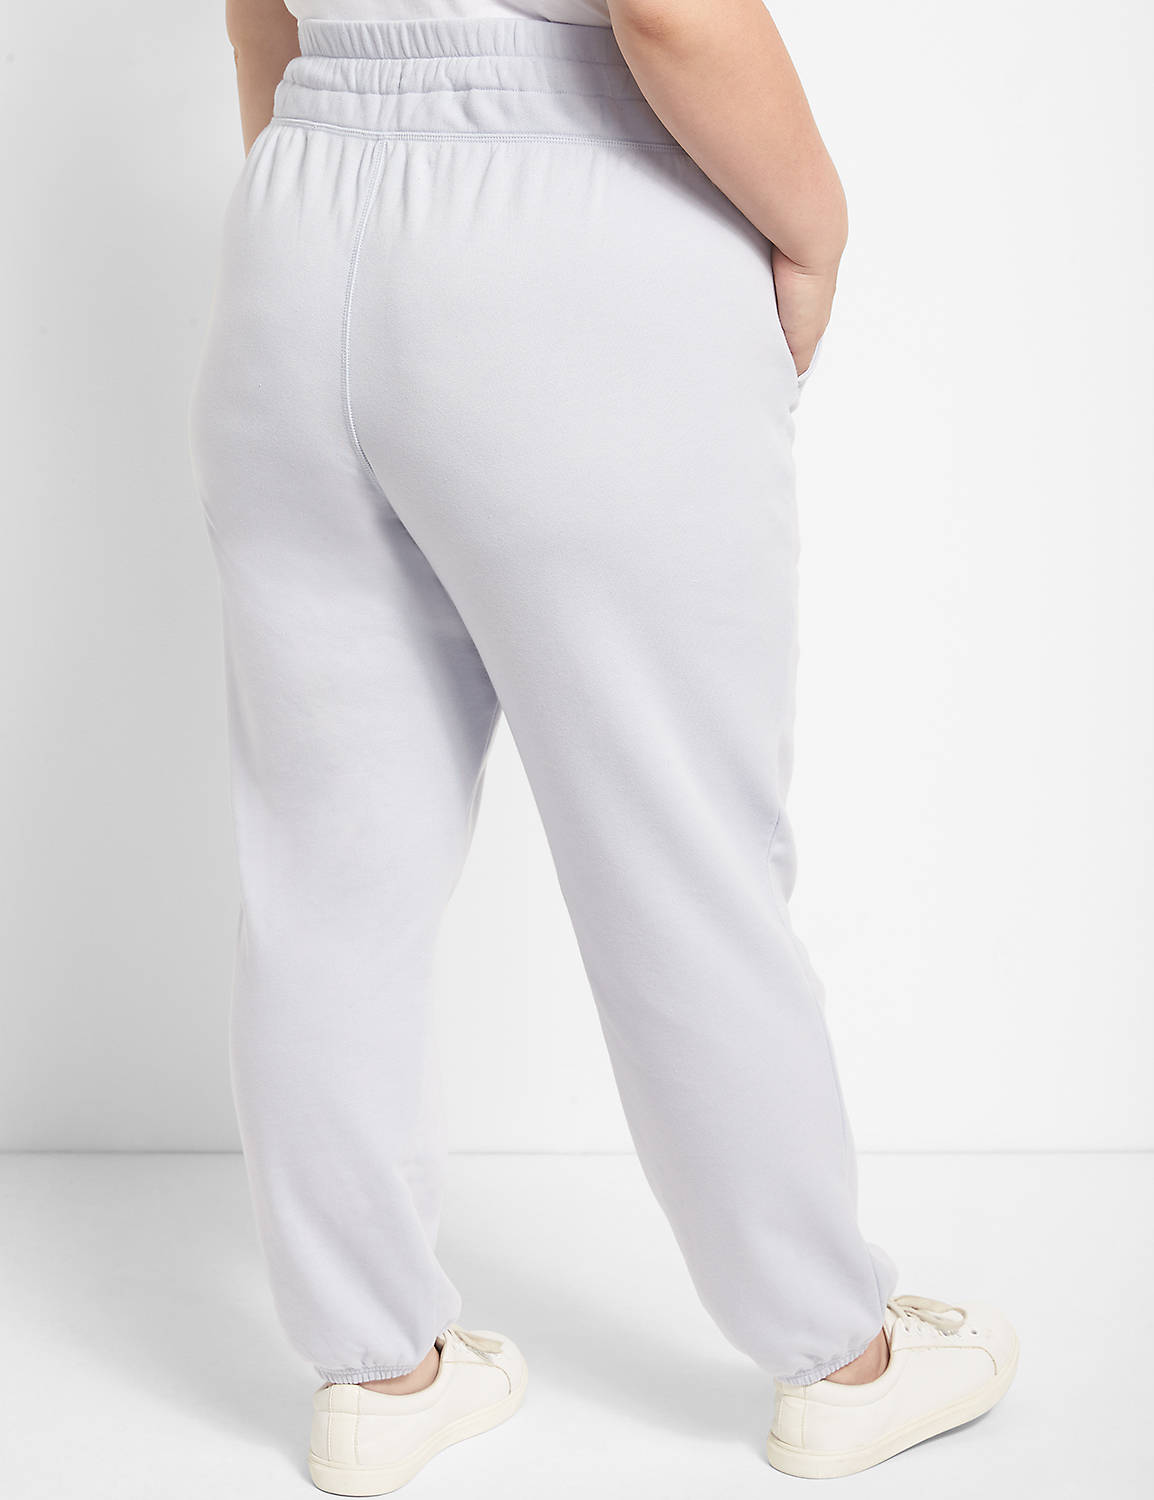 LIVI French Terry Jogger Product Image 2